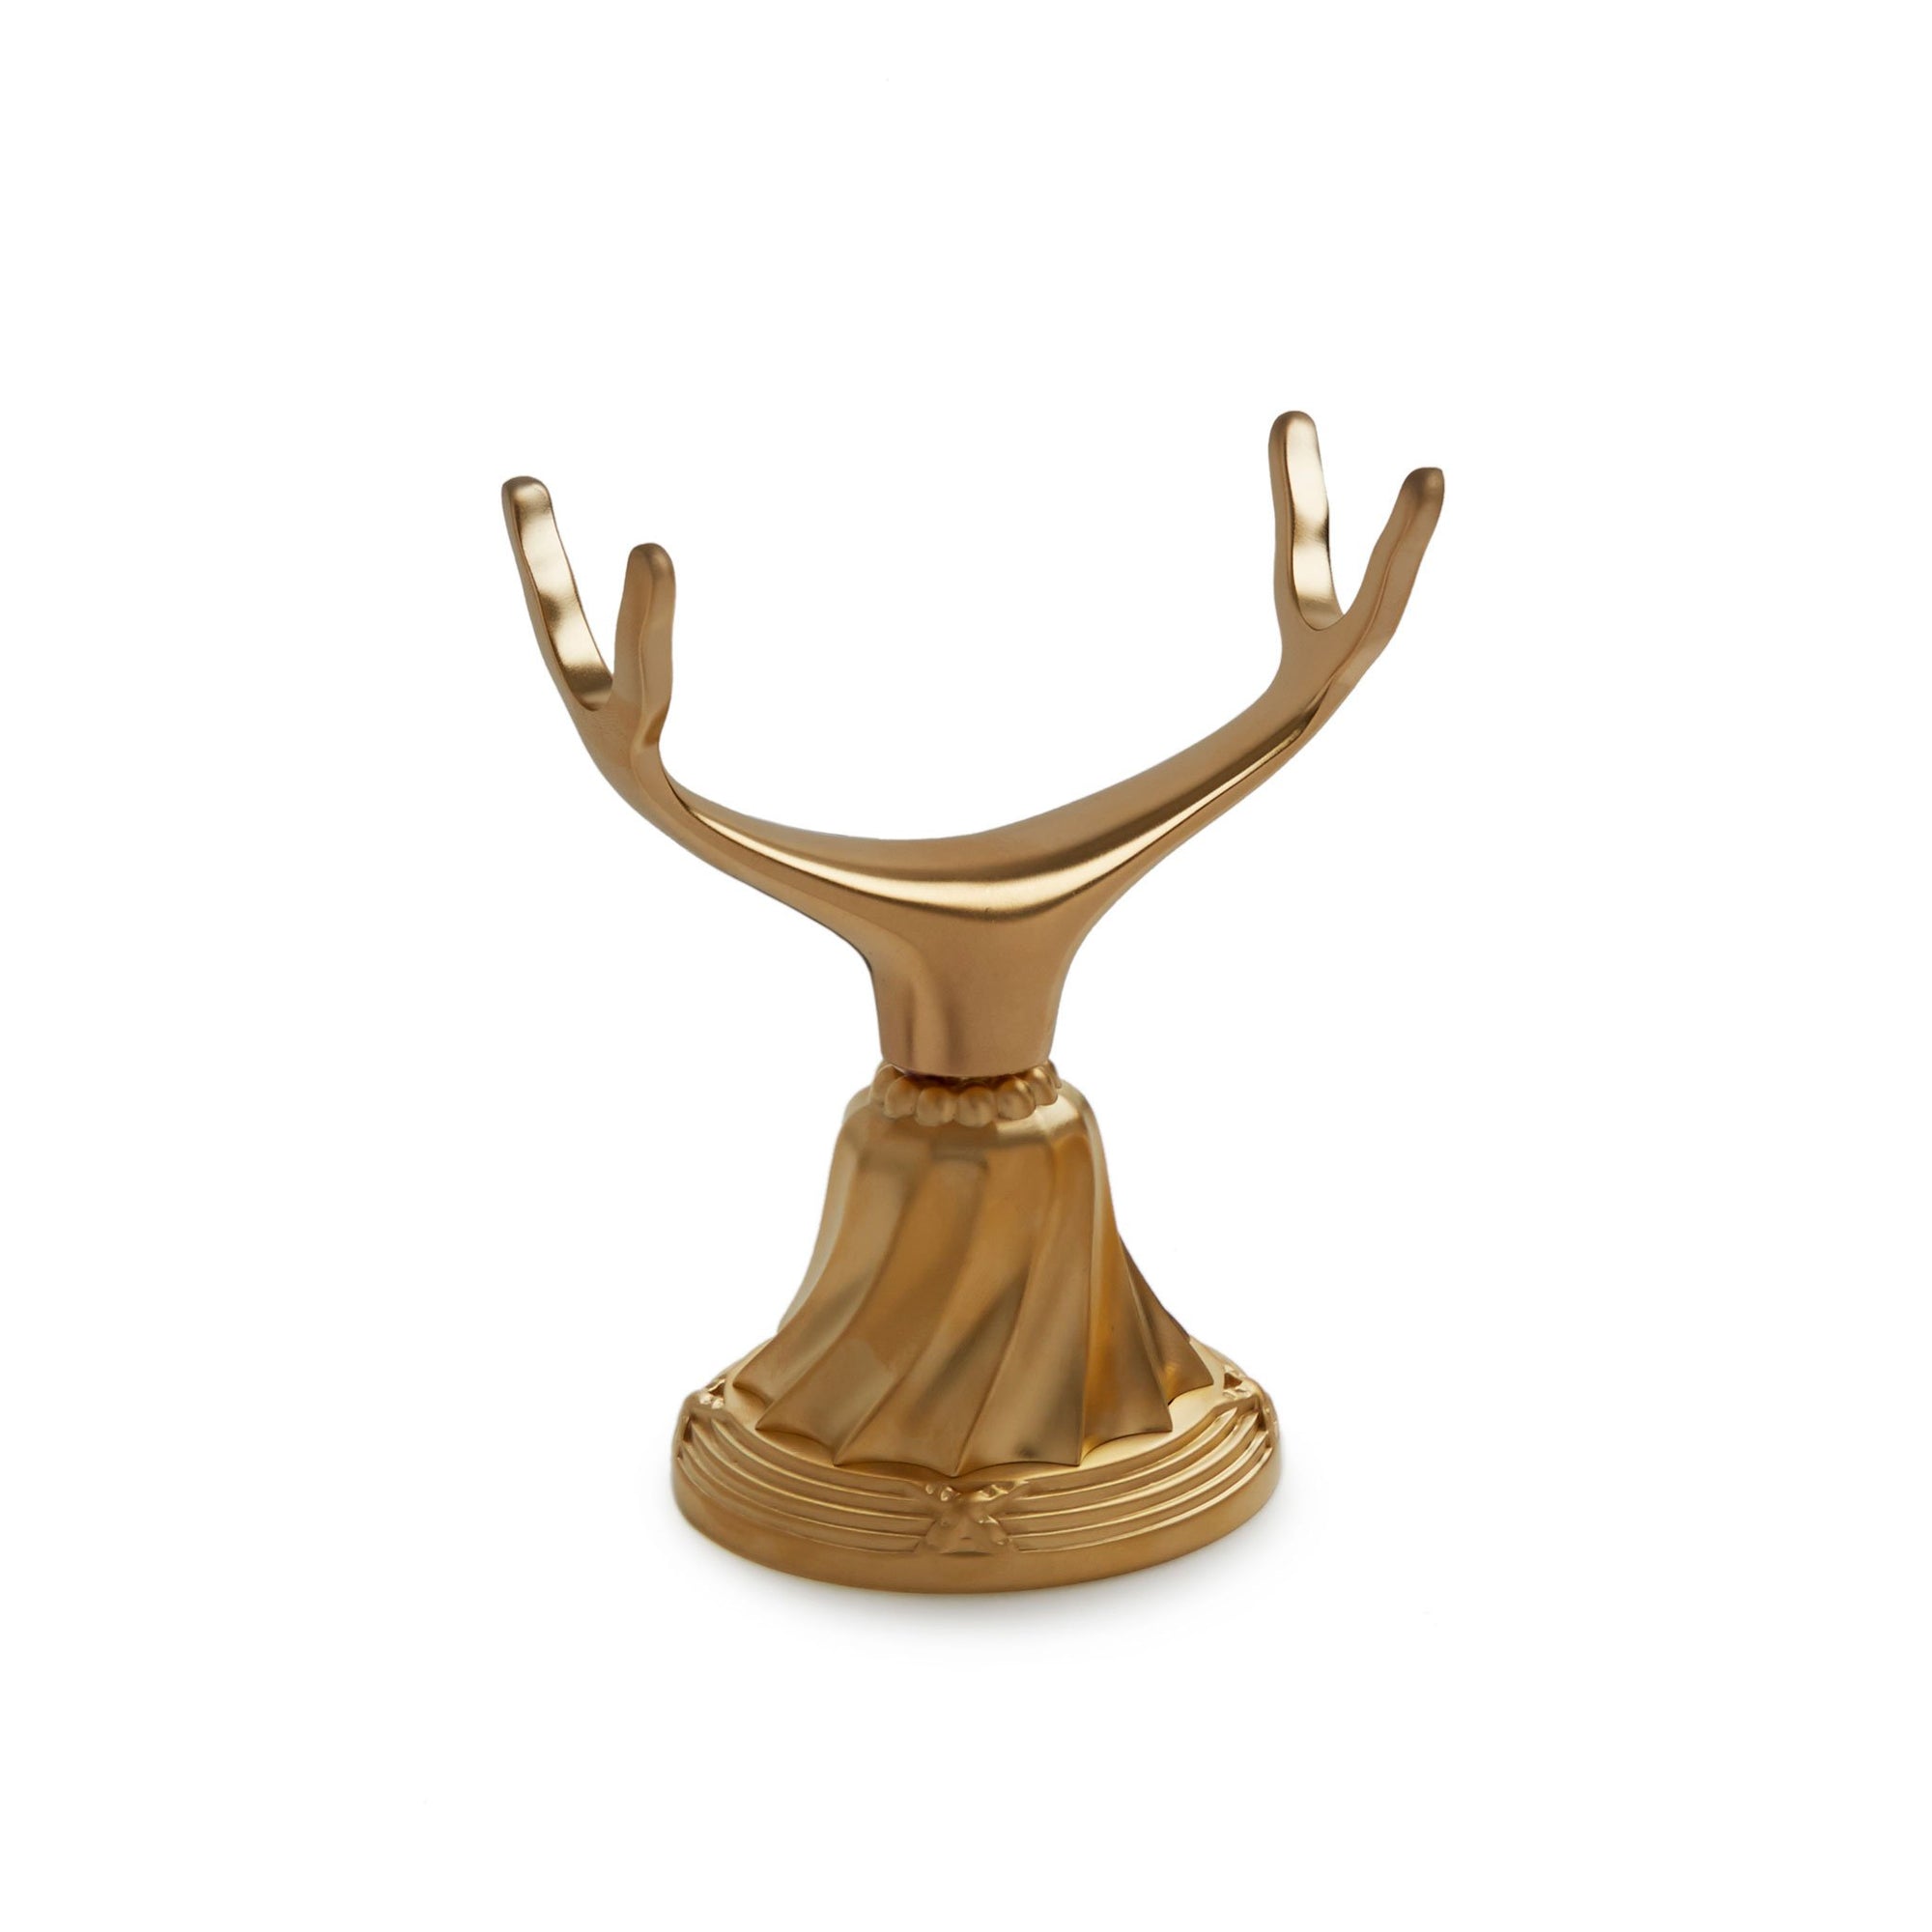 0849DKMT-RR-GP Sherle Wagner International Deck Mount Cradle with Ribbon & Reed Escutcheon in Gold Plate metal finish